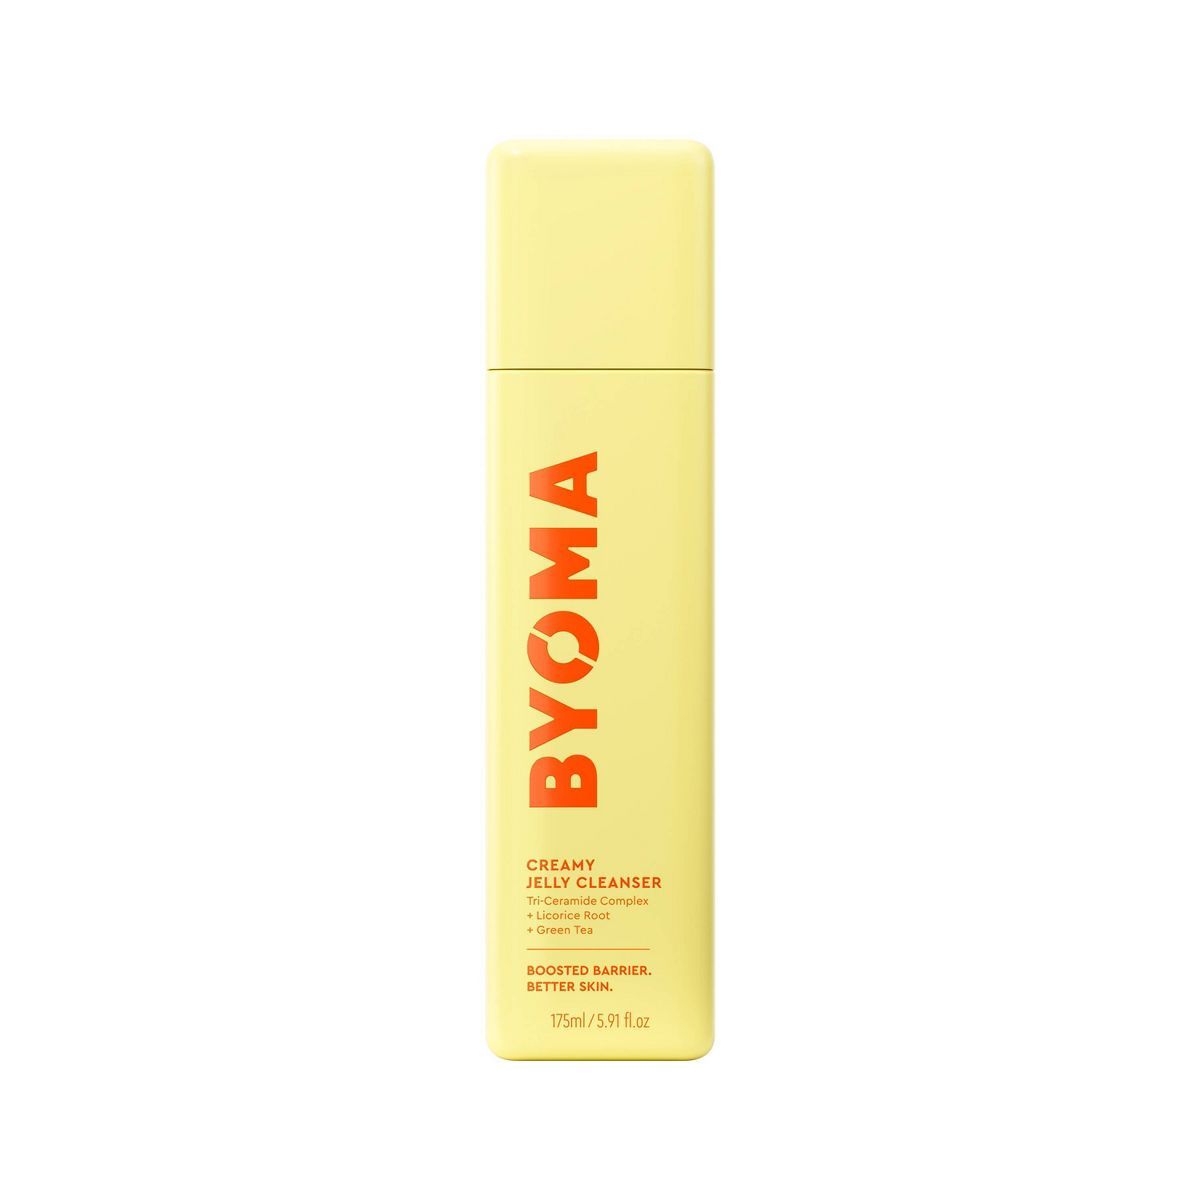 BYOMA Creamy Jelly Face Cleanser - Unscented - 5.91 fl oz | Target